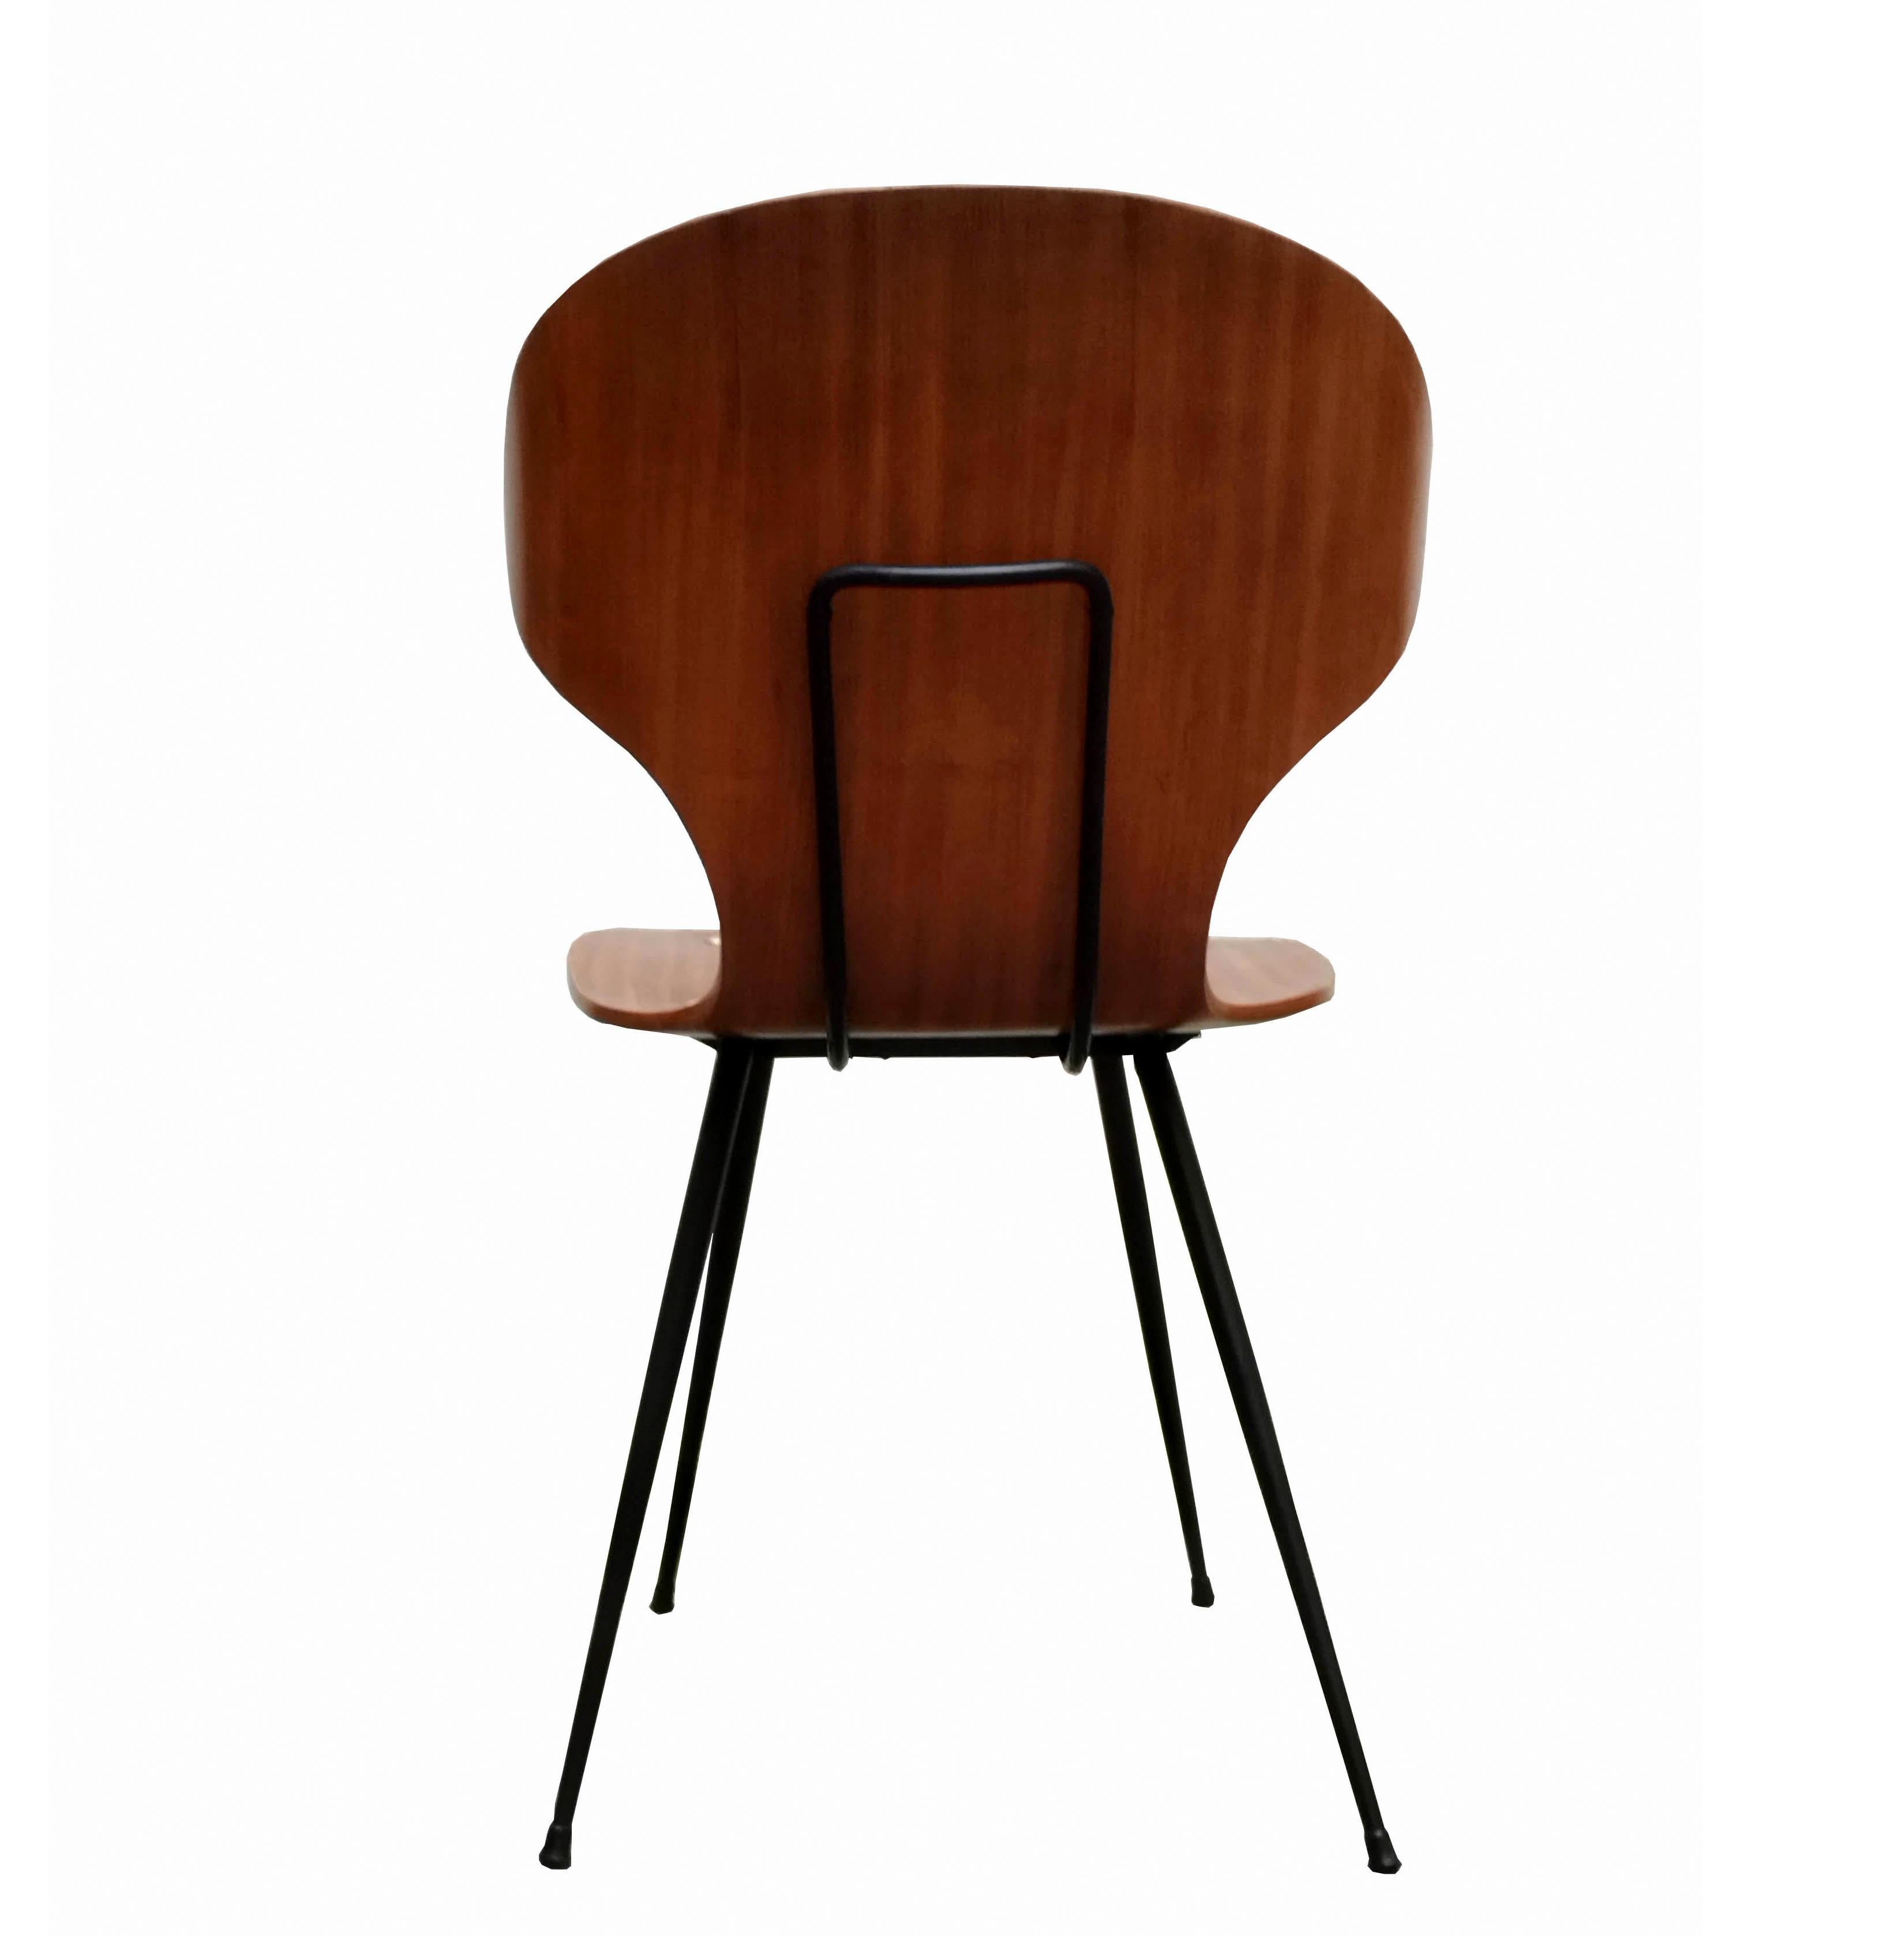 Mid-20th Century Carlo Ratti Set of 4 Teak Chairs, Italy 1950s For Sale